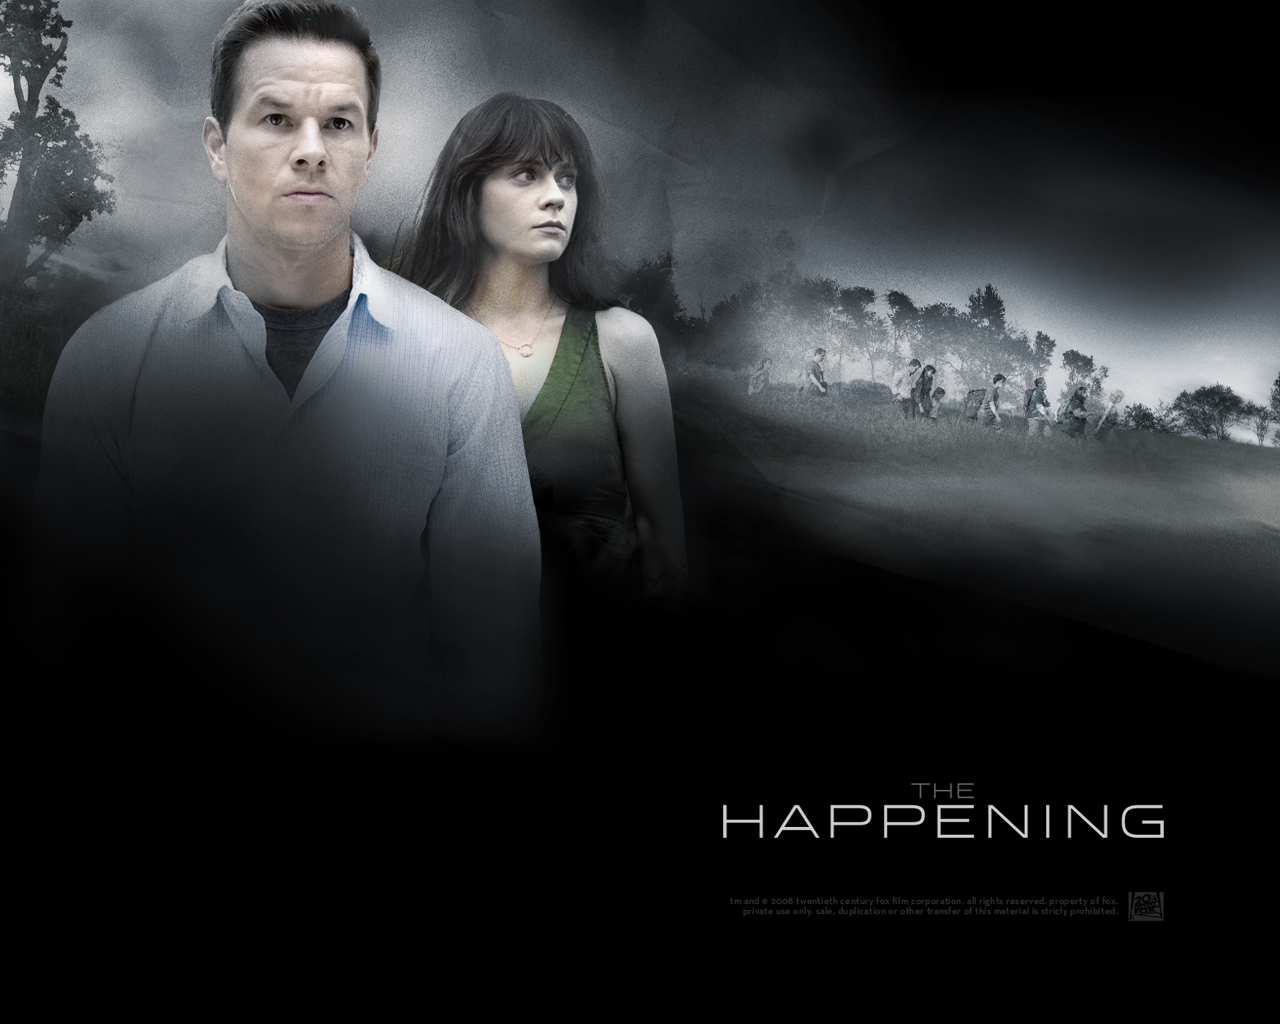 Download High quality The Happening wallpaper / Movies / 1280x1024